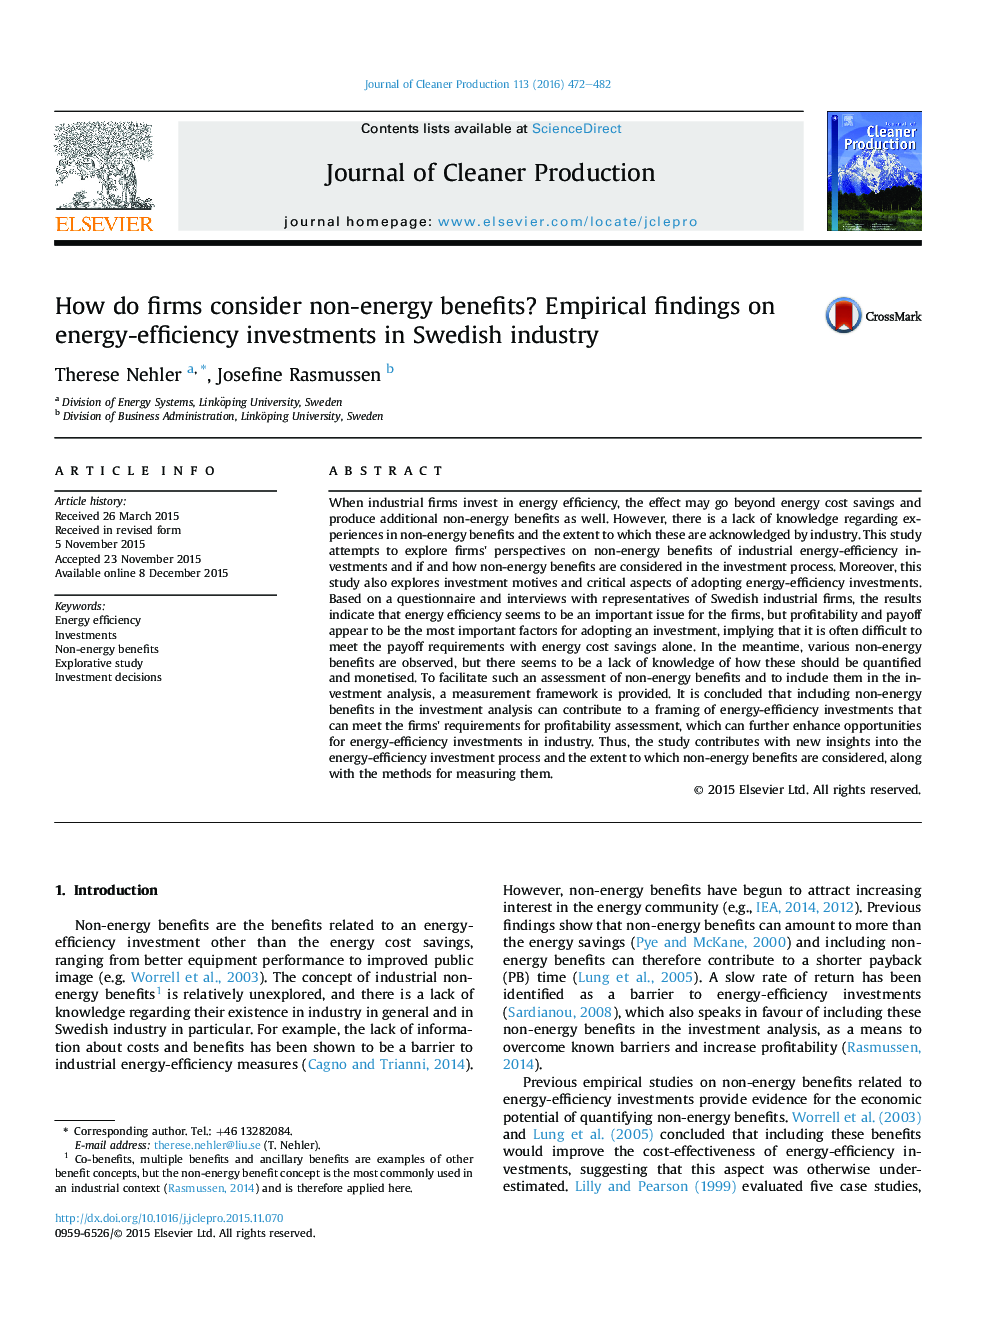 How do firms consider non-energy benefits? Empirical findings on energy-efficiency investments in Swedish industry